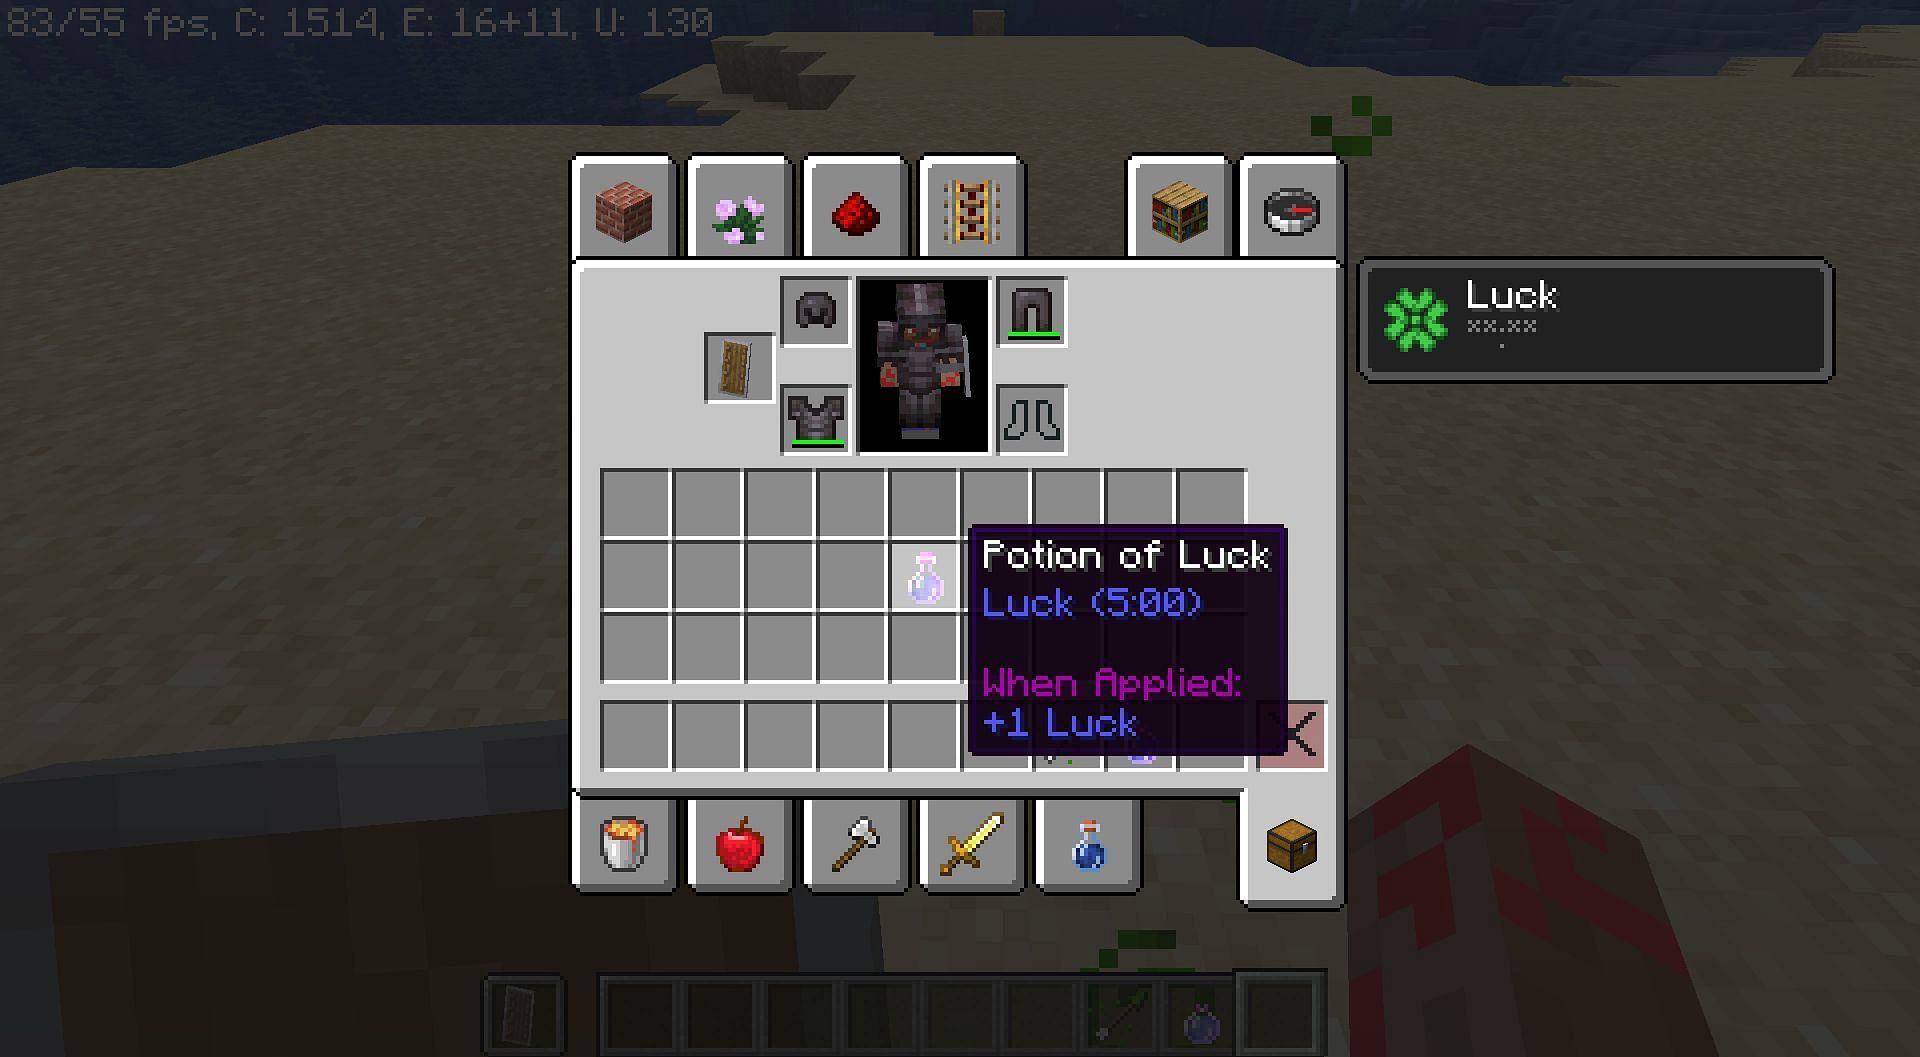 Only obtainable in creative mode (Image via Minecraft)